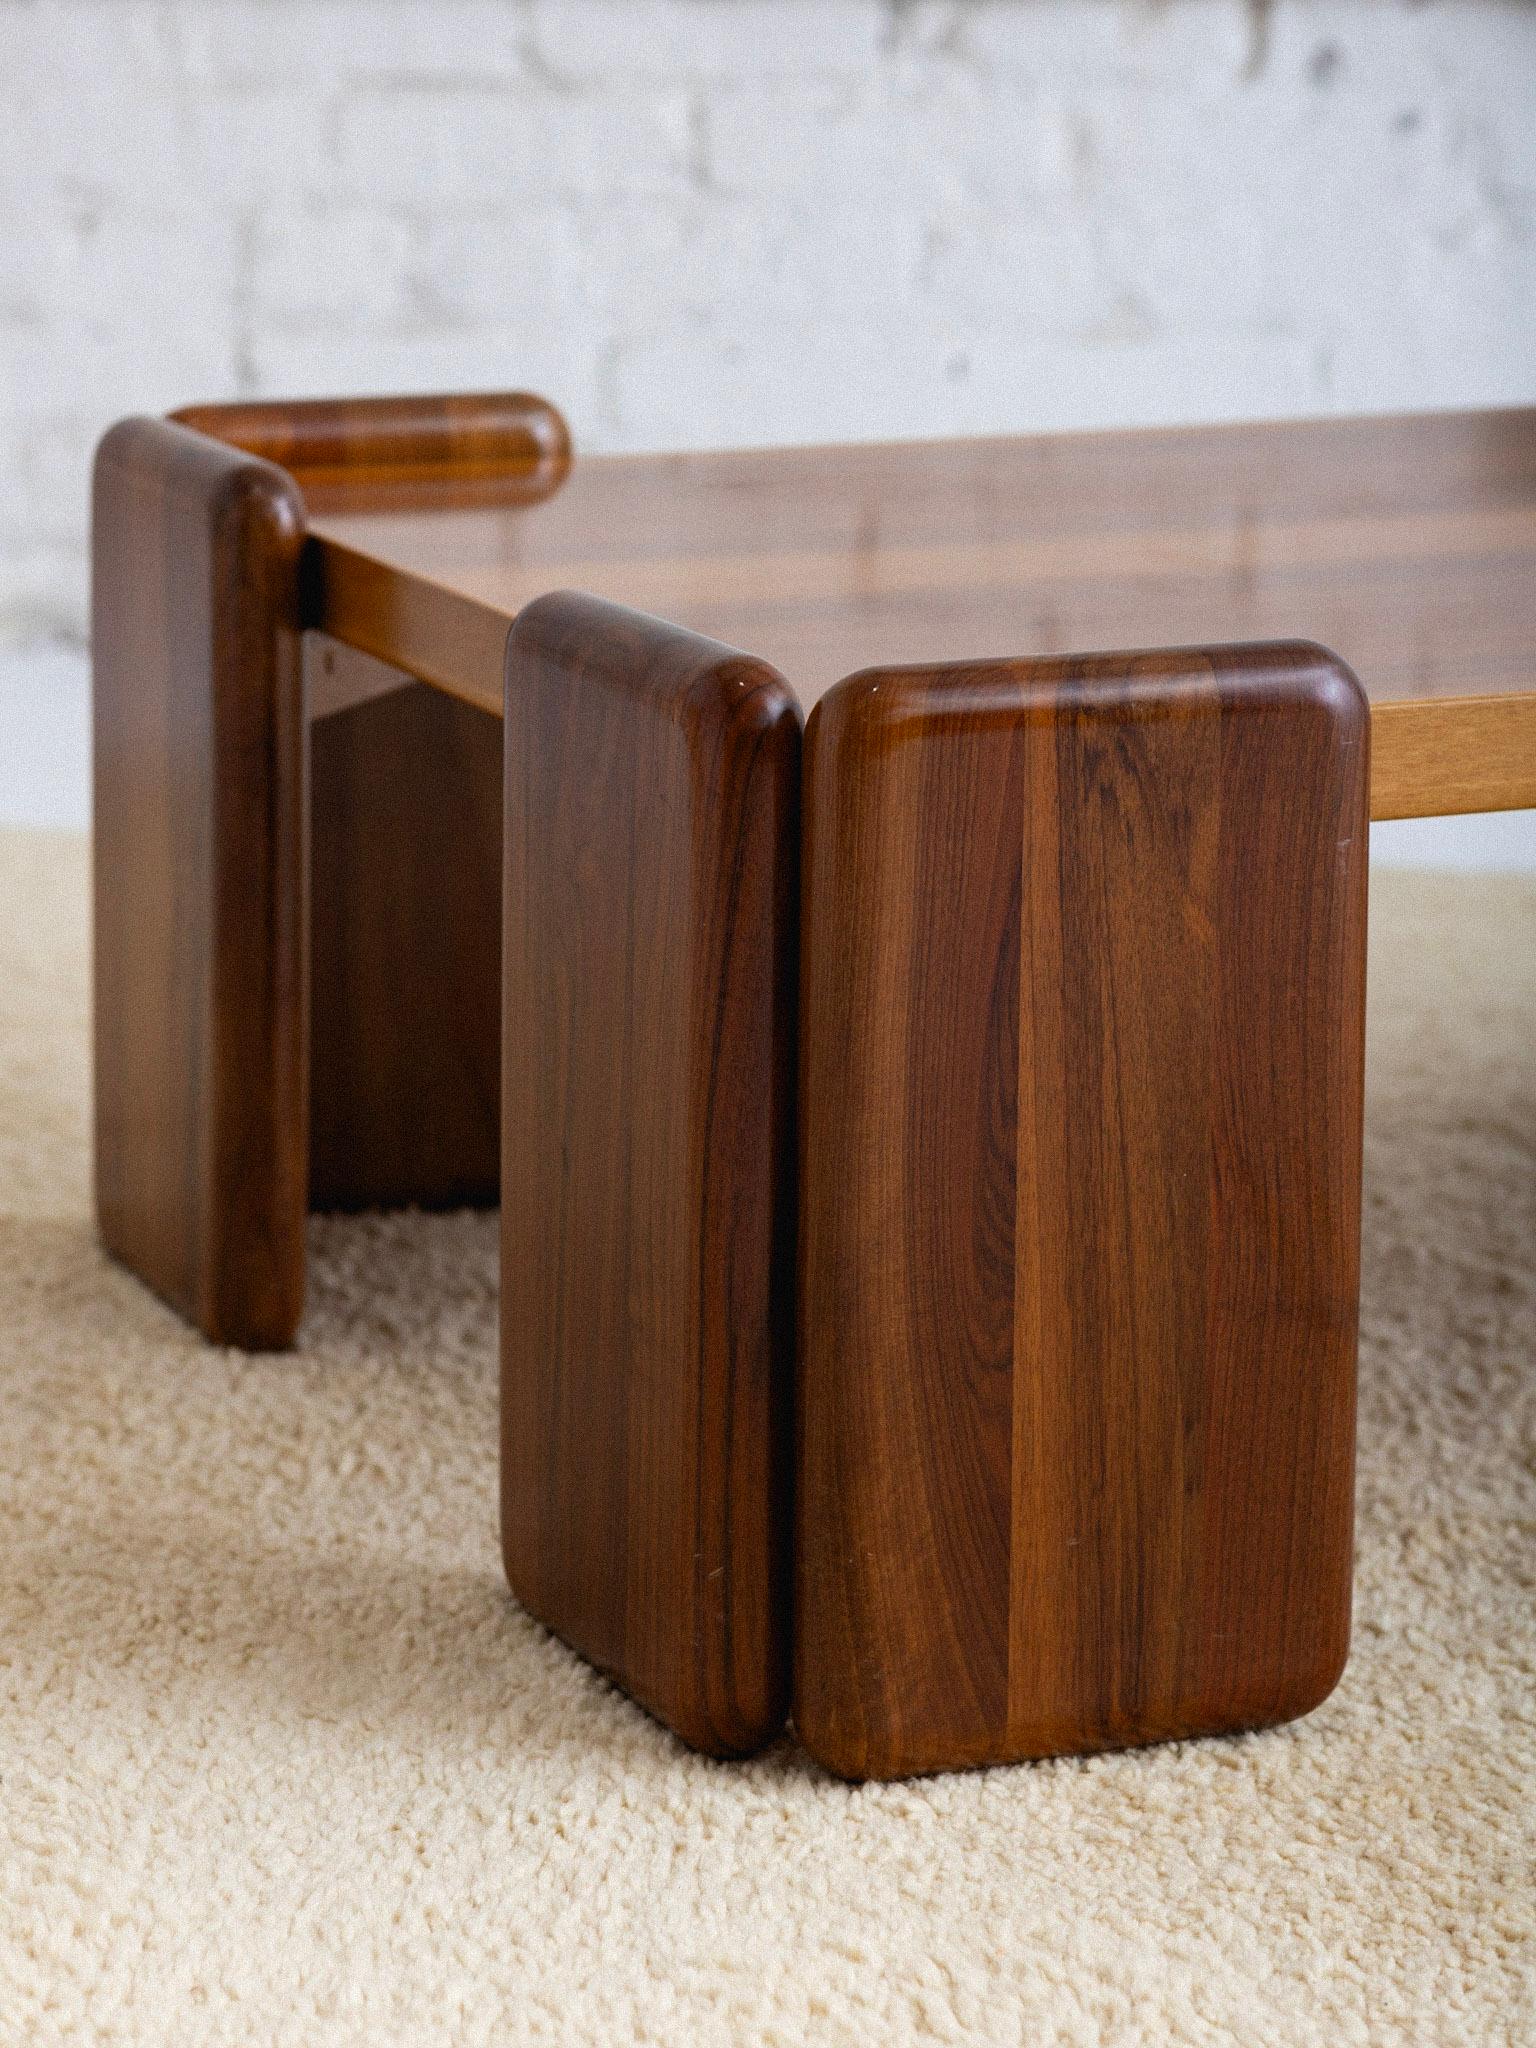 20th Century 'Sapporo' Wood Coffee Table by Mario Marenco for Mobil Girgi